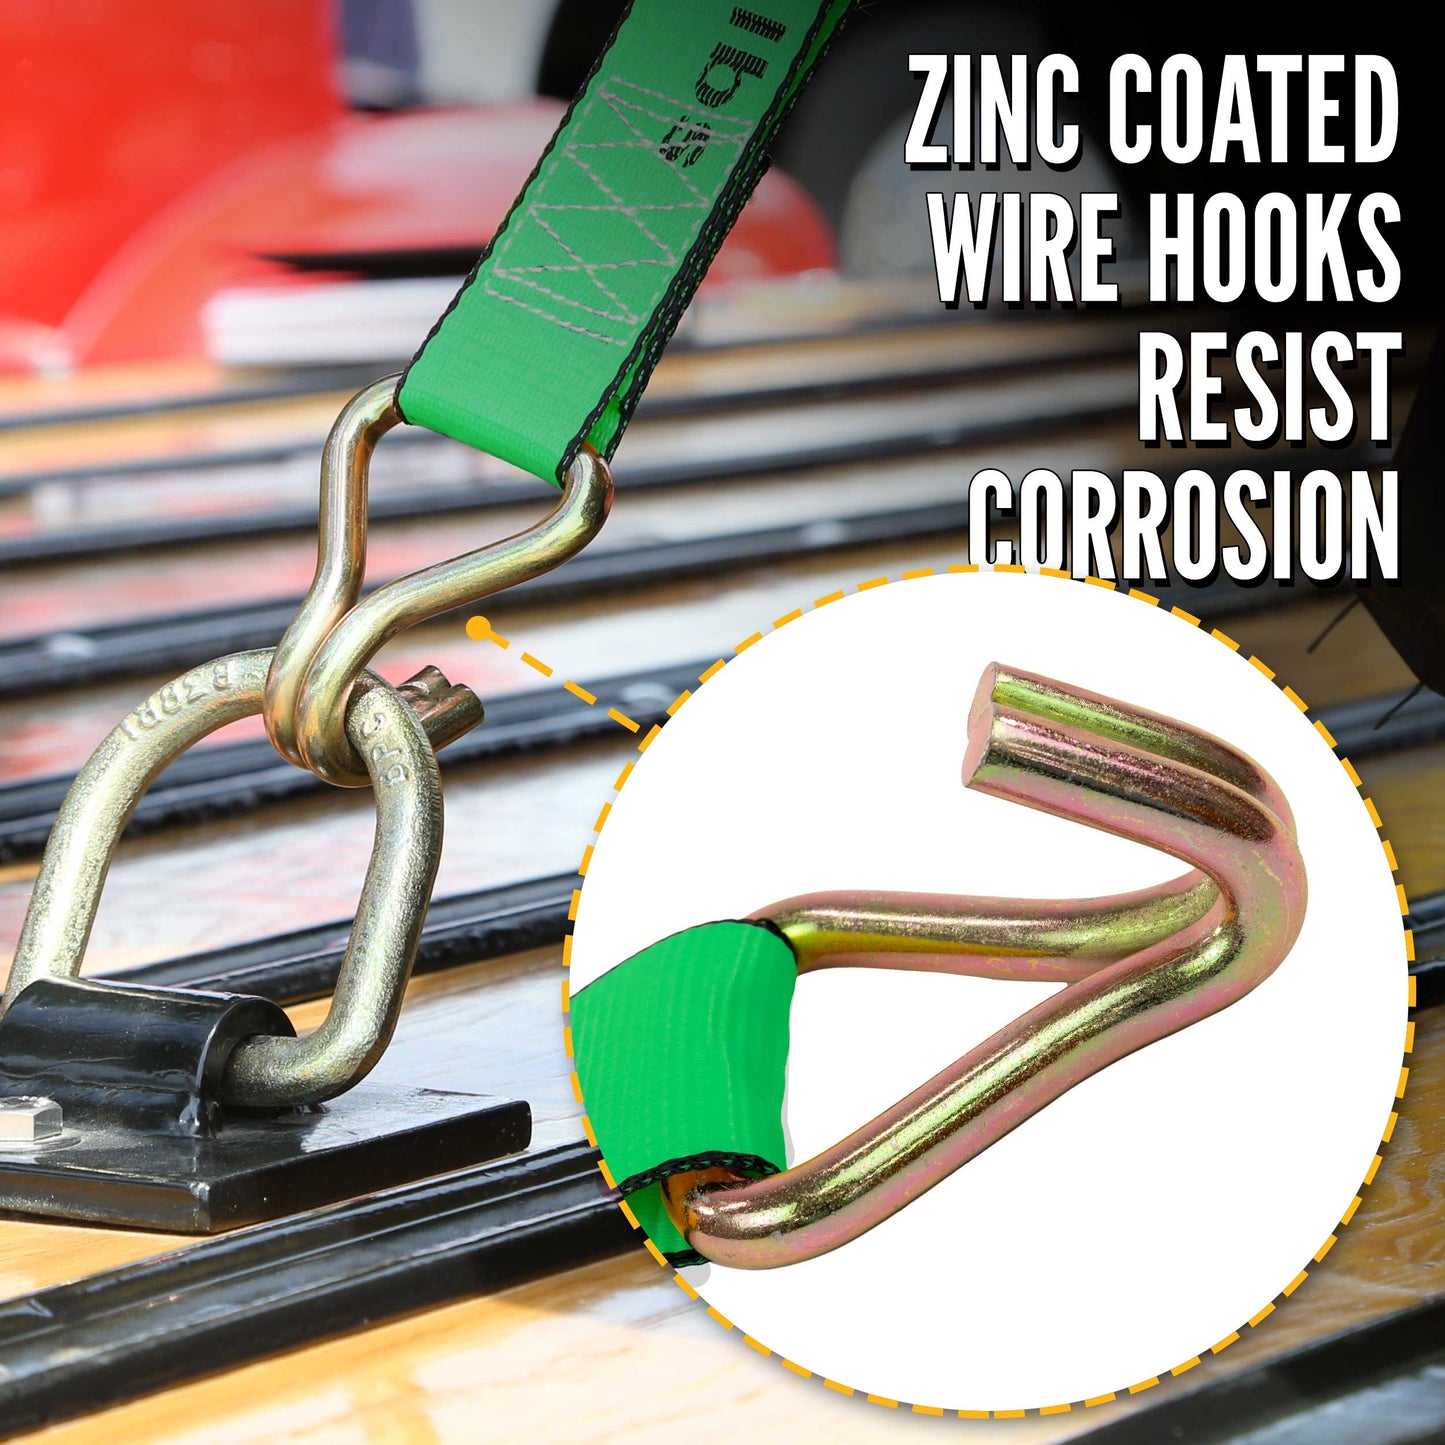 3-x-50-winch-strap-with-wire-hook-image-3